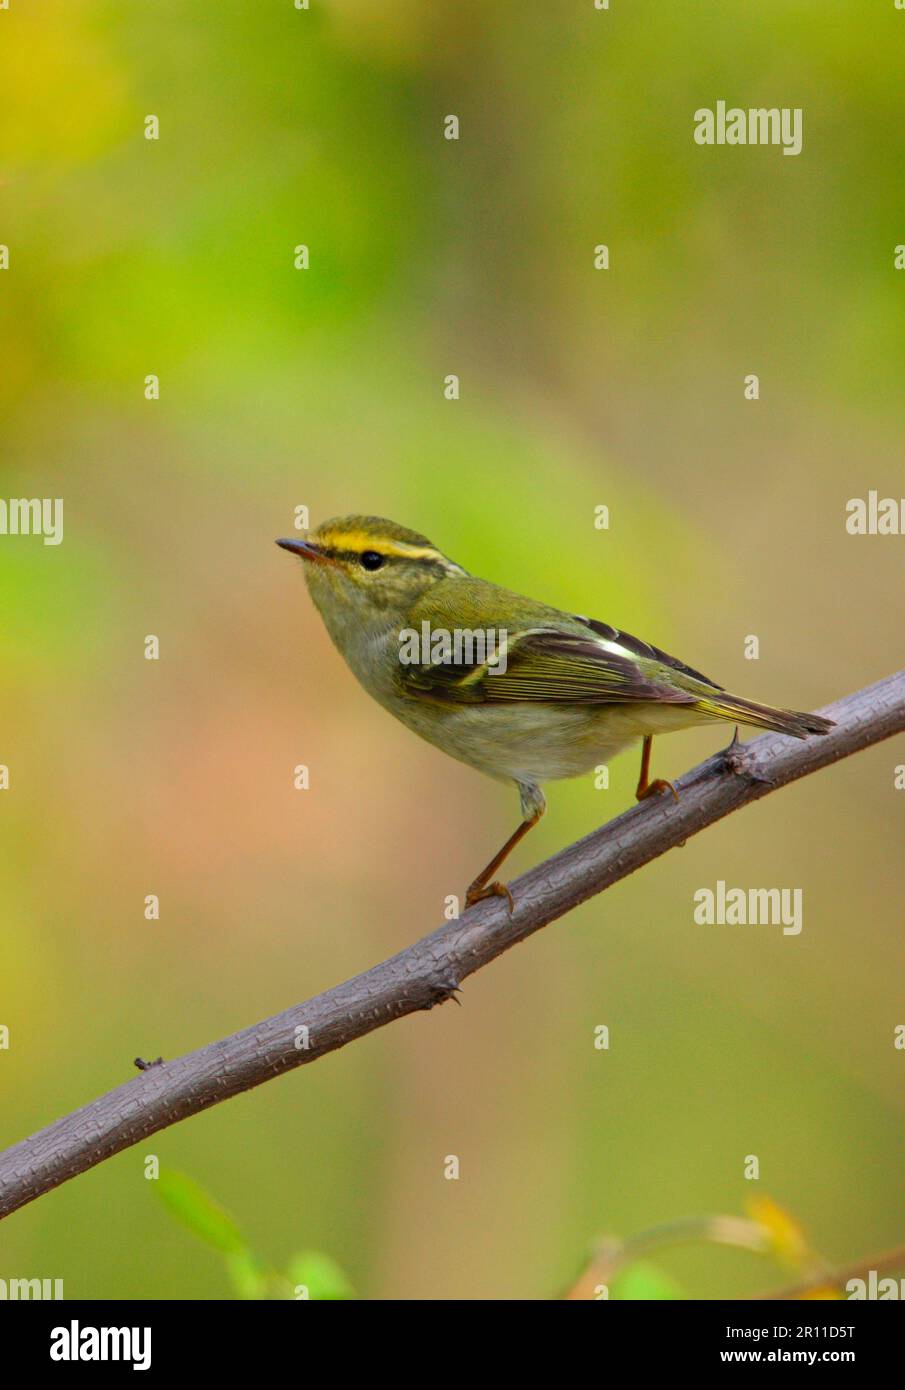 Pallas's Warbler (Phylloscopus proregulus) adult, perched on twig, Hebei, China Stock Photo